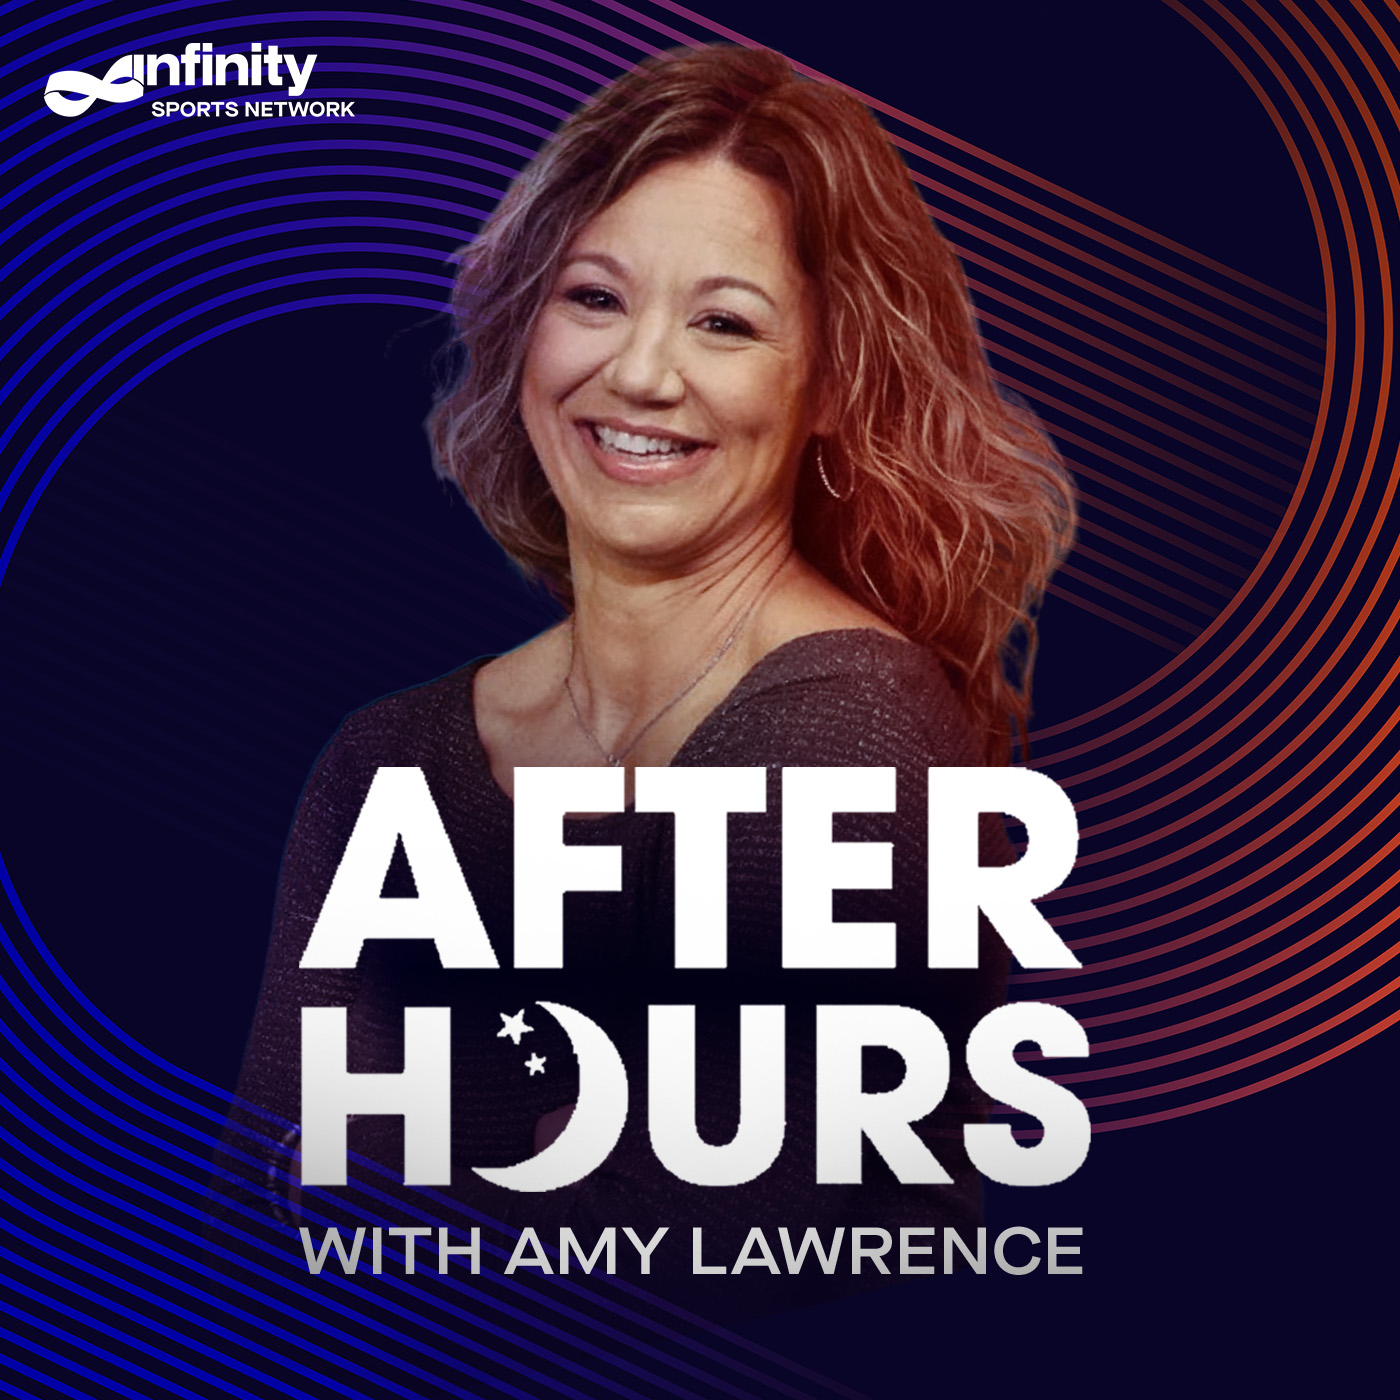 12-16-21 After Hours with Amy Lawrence PODCAST: Hour 1